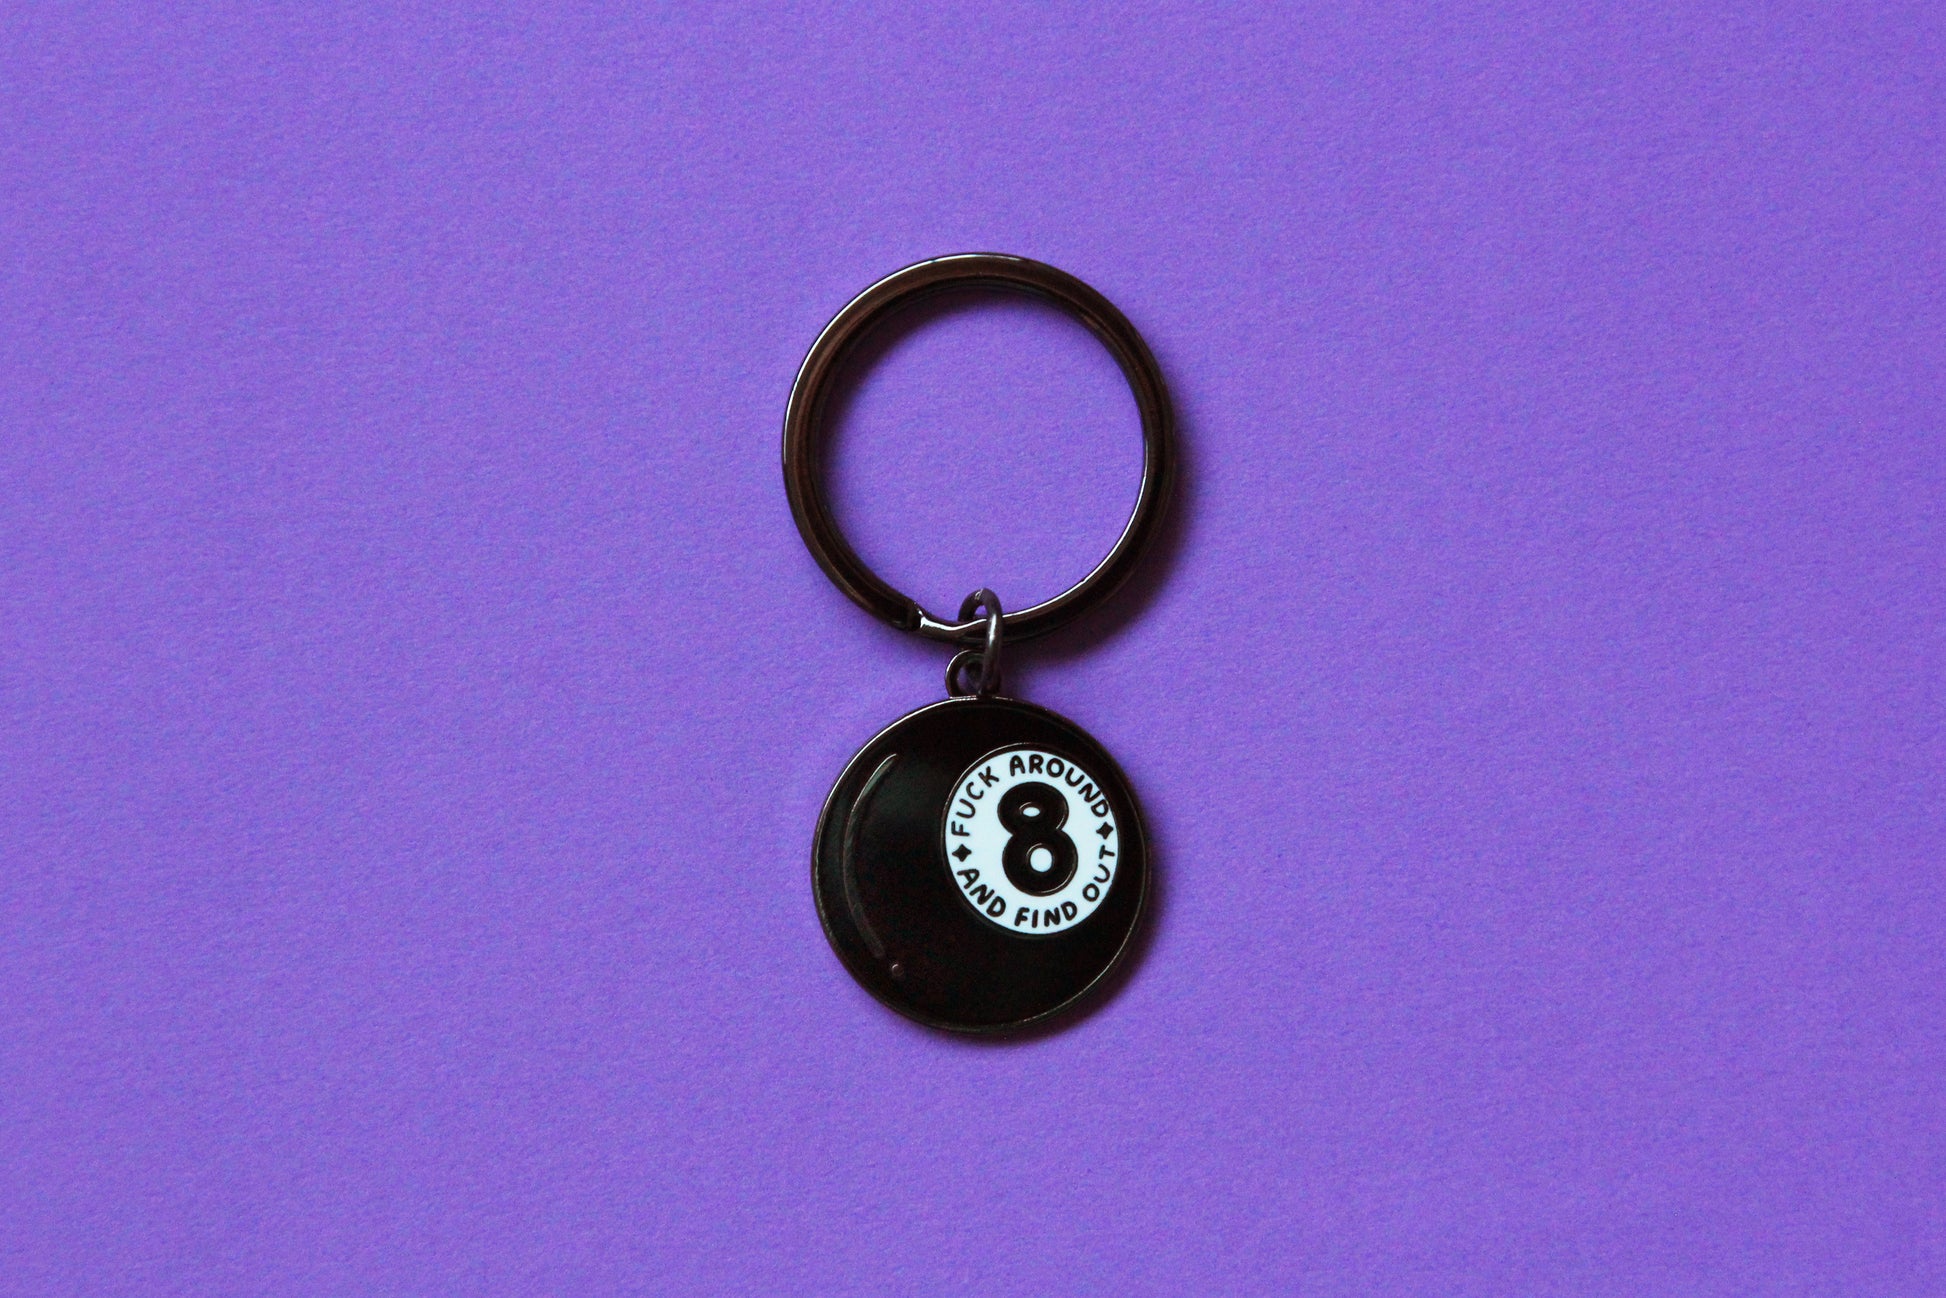 An enamel keychain showing a magic 8 ball that says "Fuck around and find out" over a purple background.